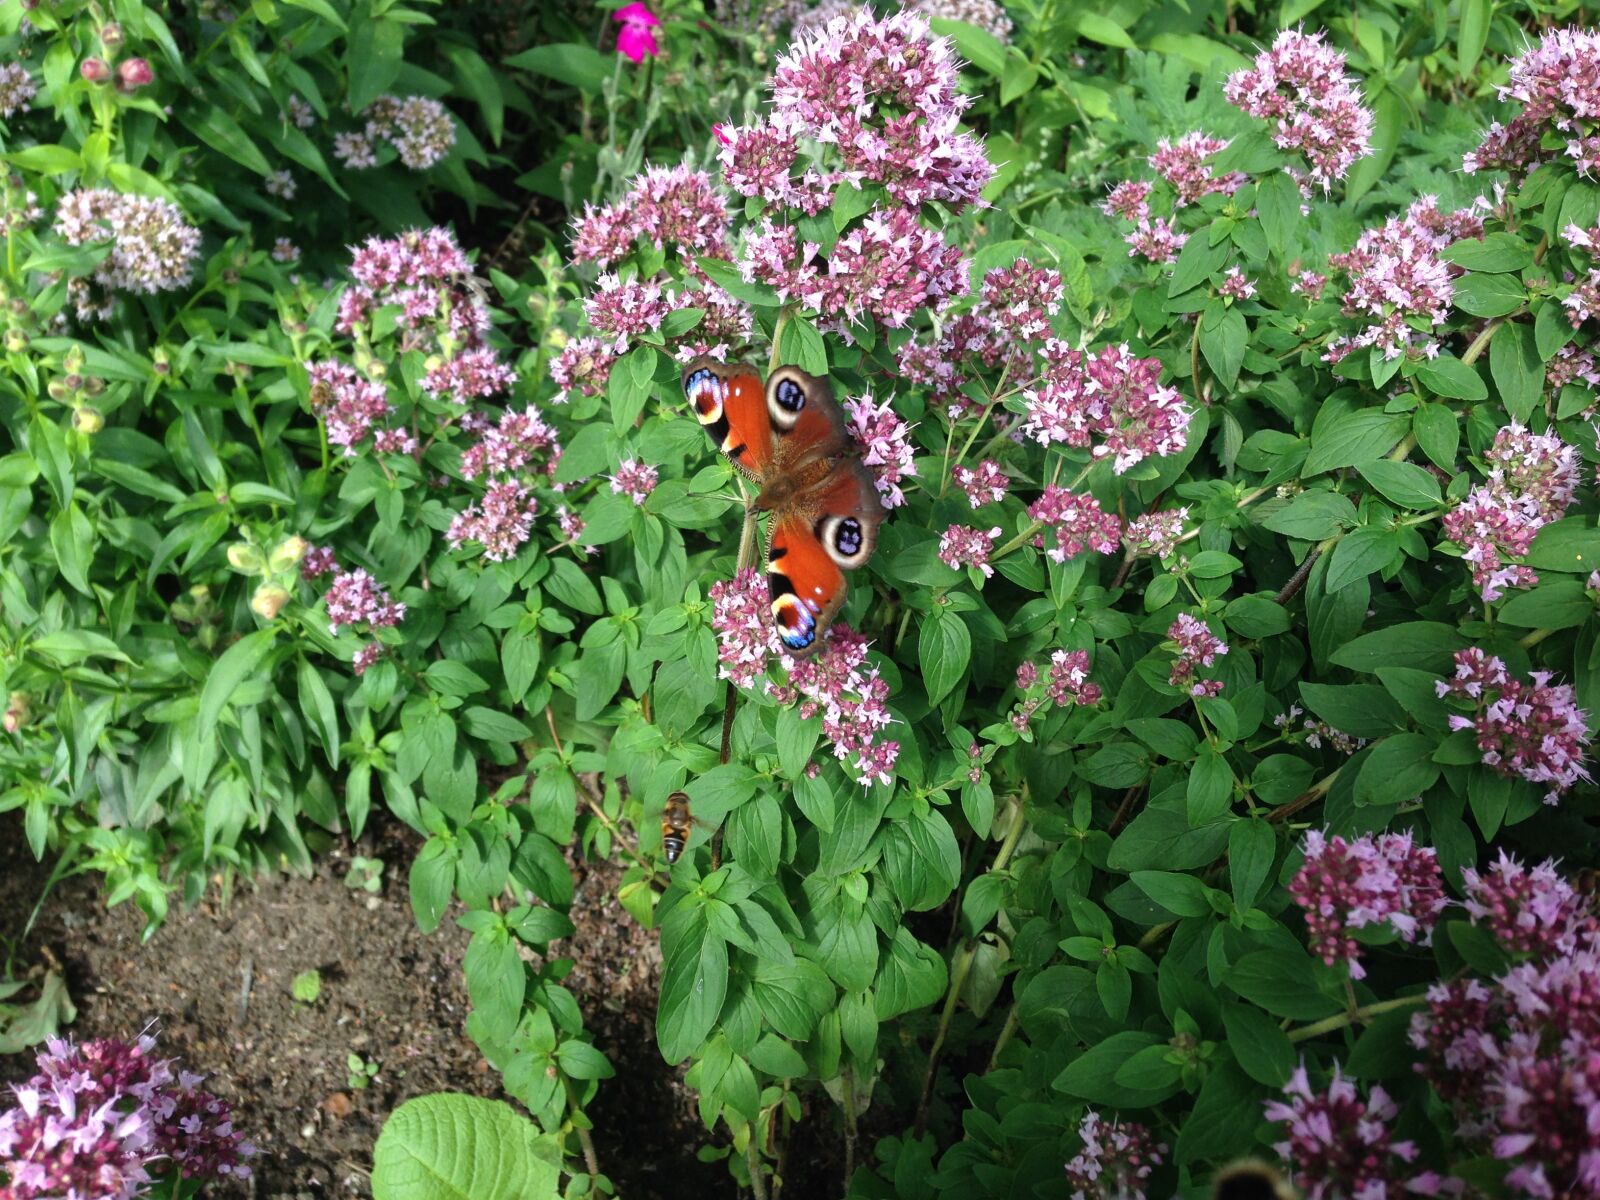 iPhone 5 back camera 4.12mm f/2.4 sample photo. Peacock, marjoram, bees photography